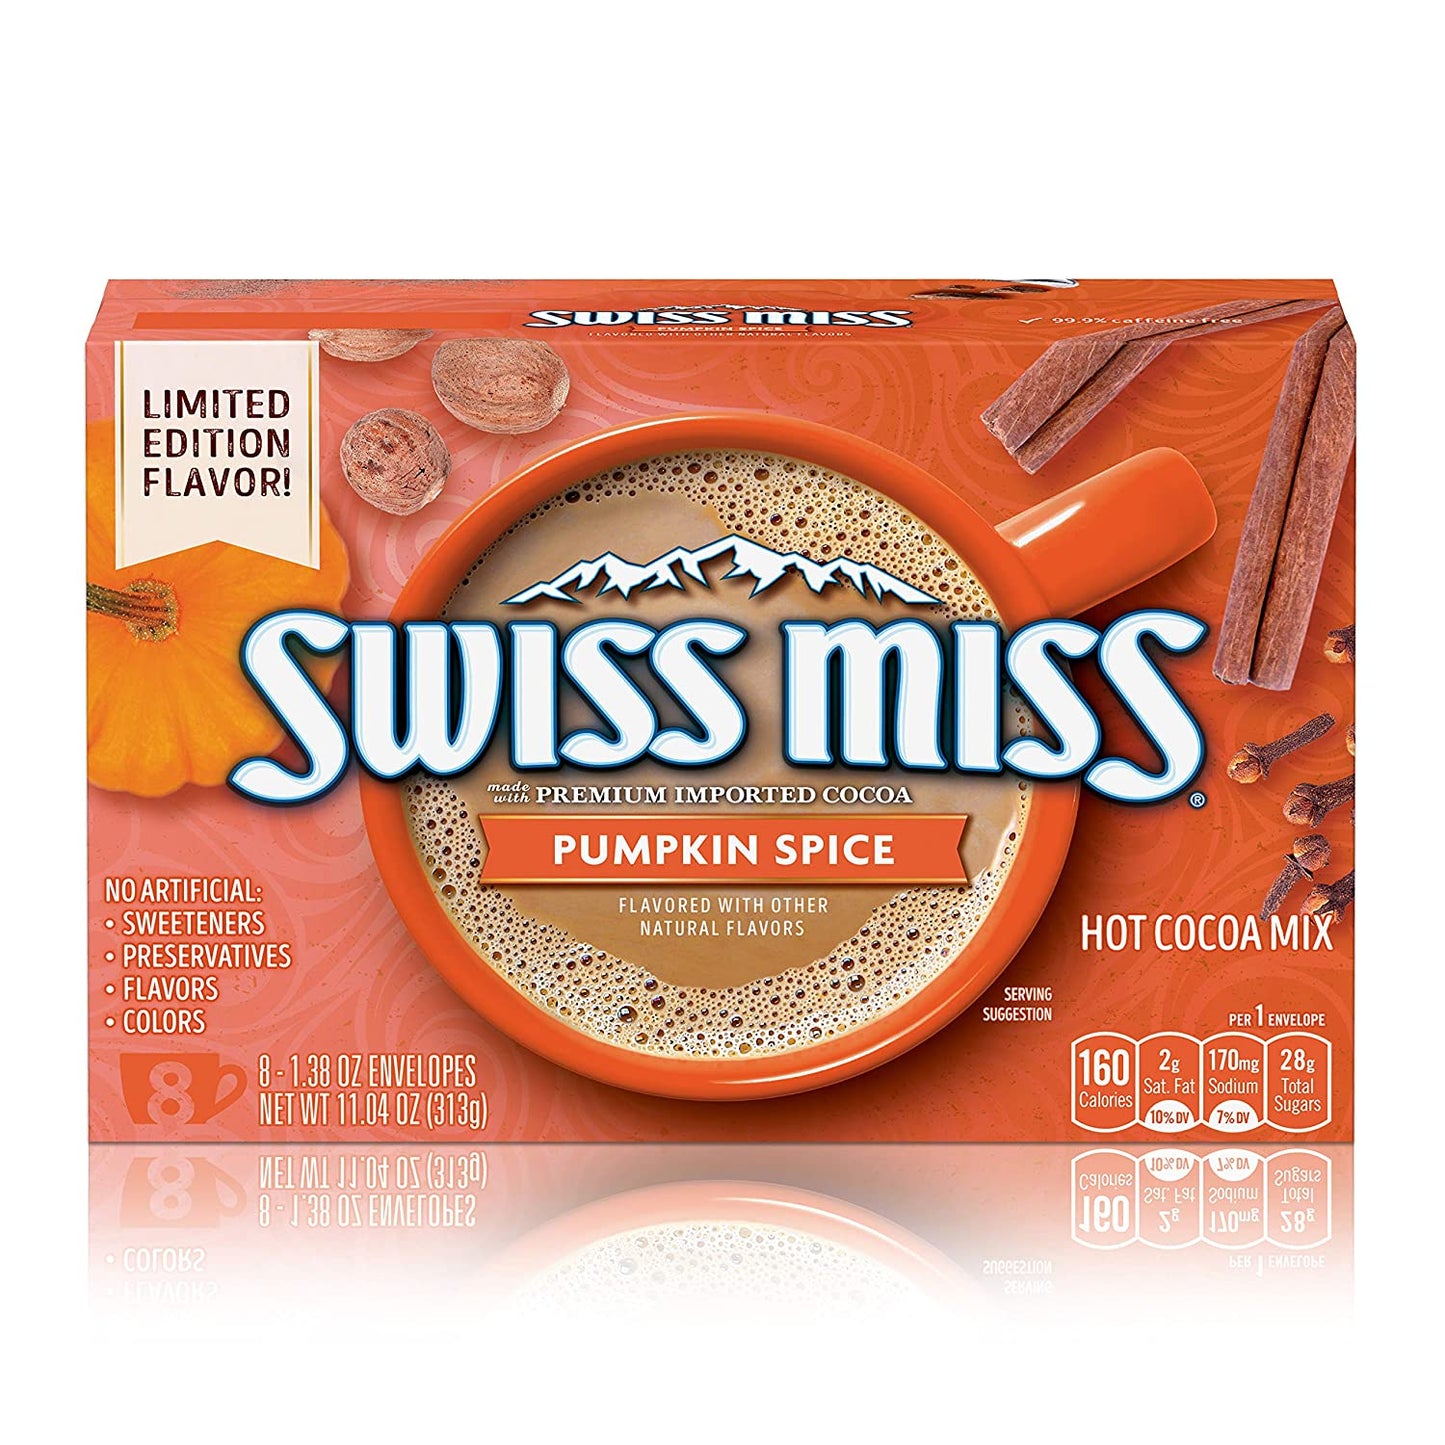 Swiss Miss Pumpkin Spice Flavored Hot Cocoa Mix Packets, 1.38 Oz. 8Count